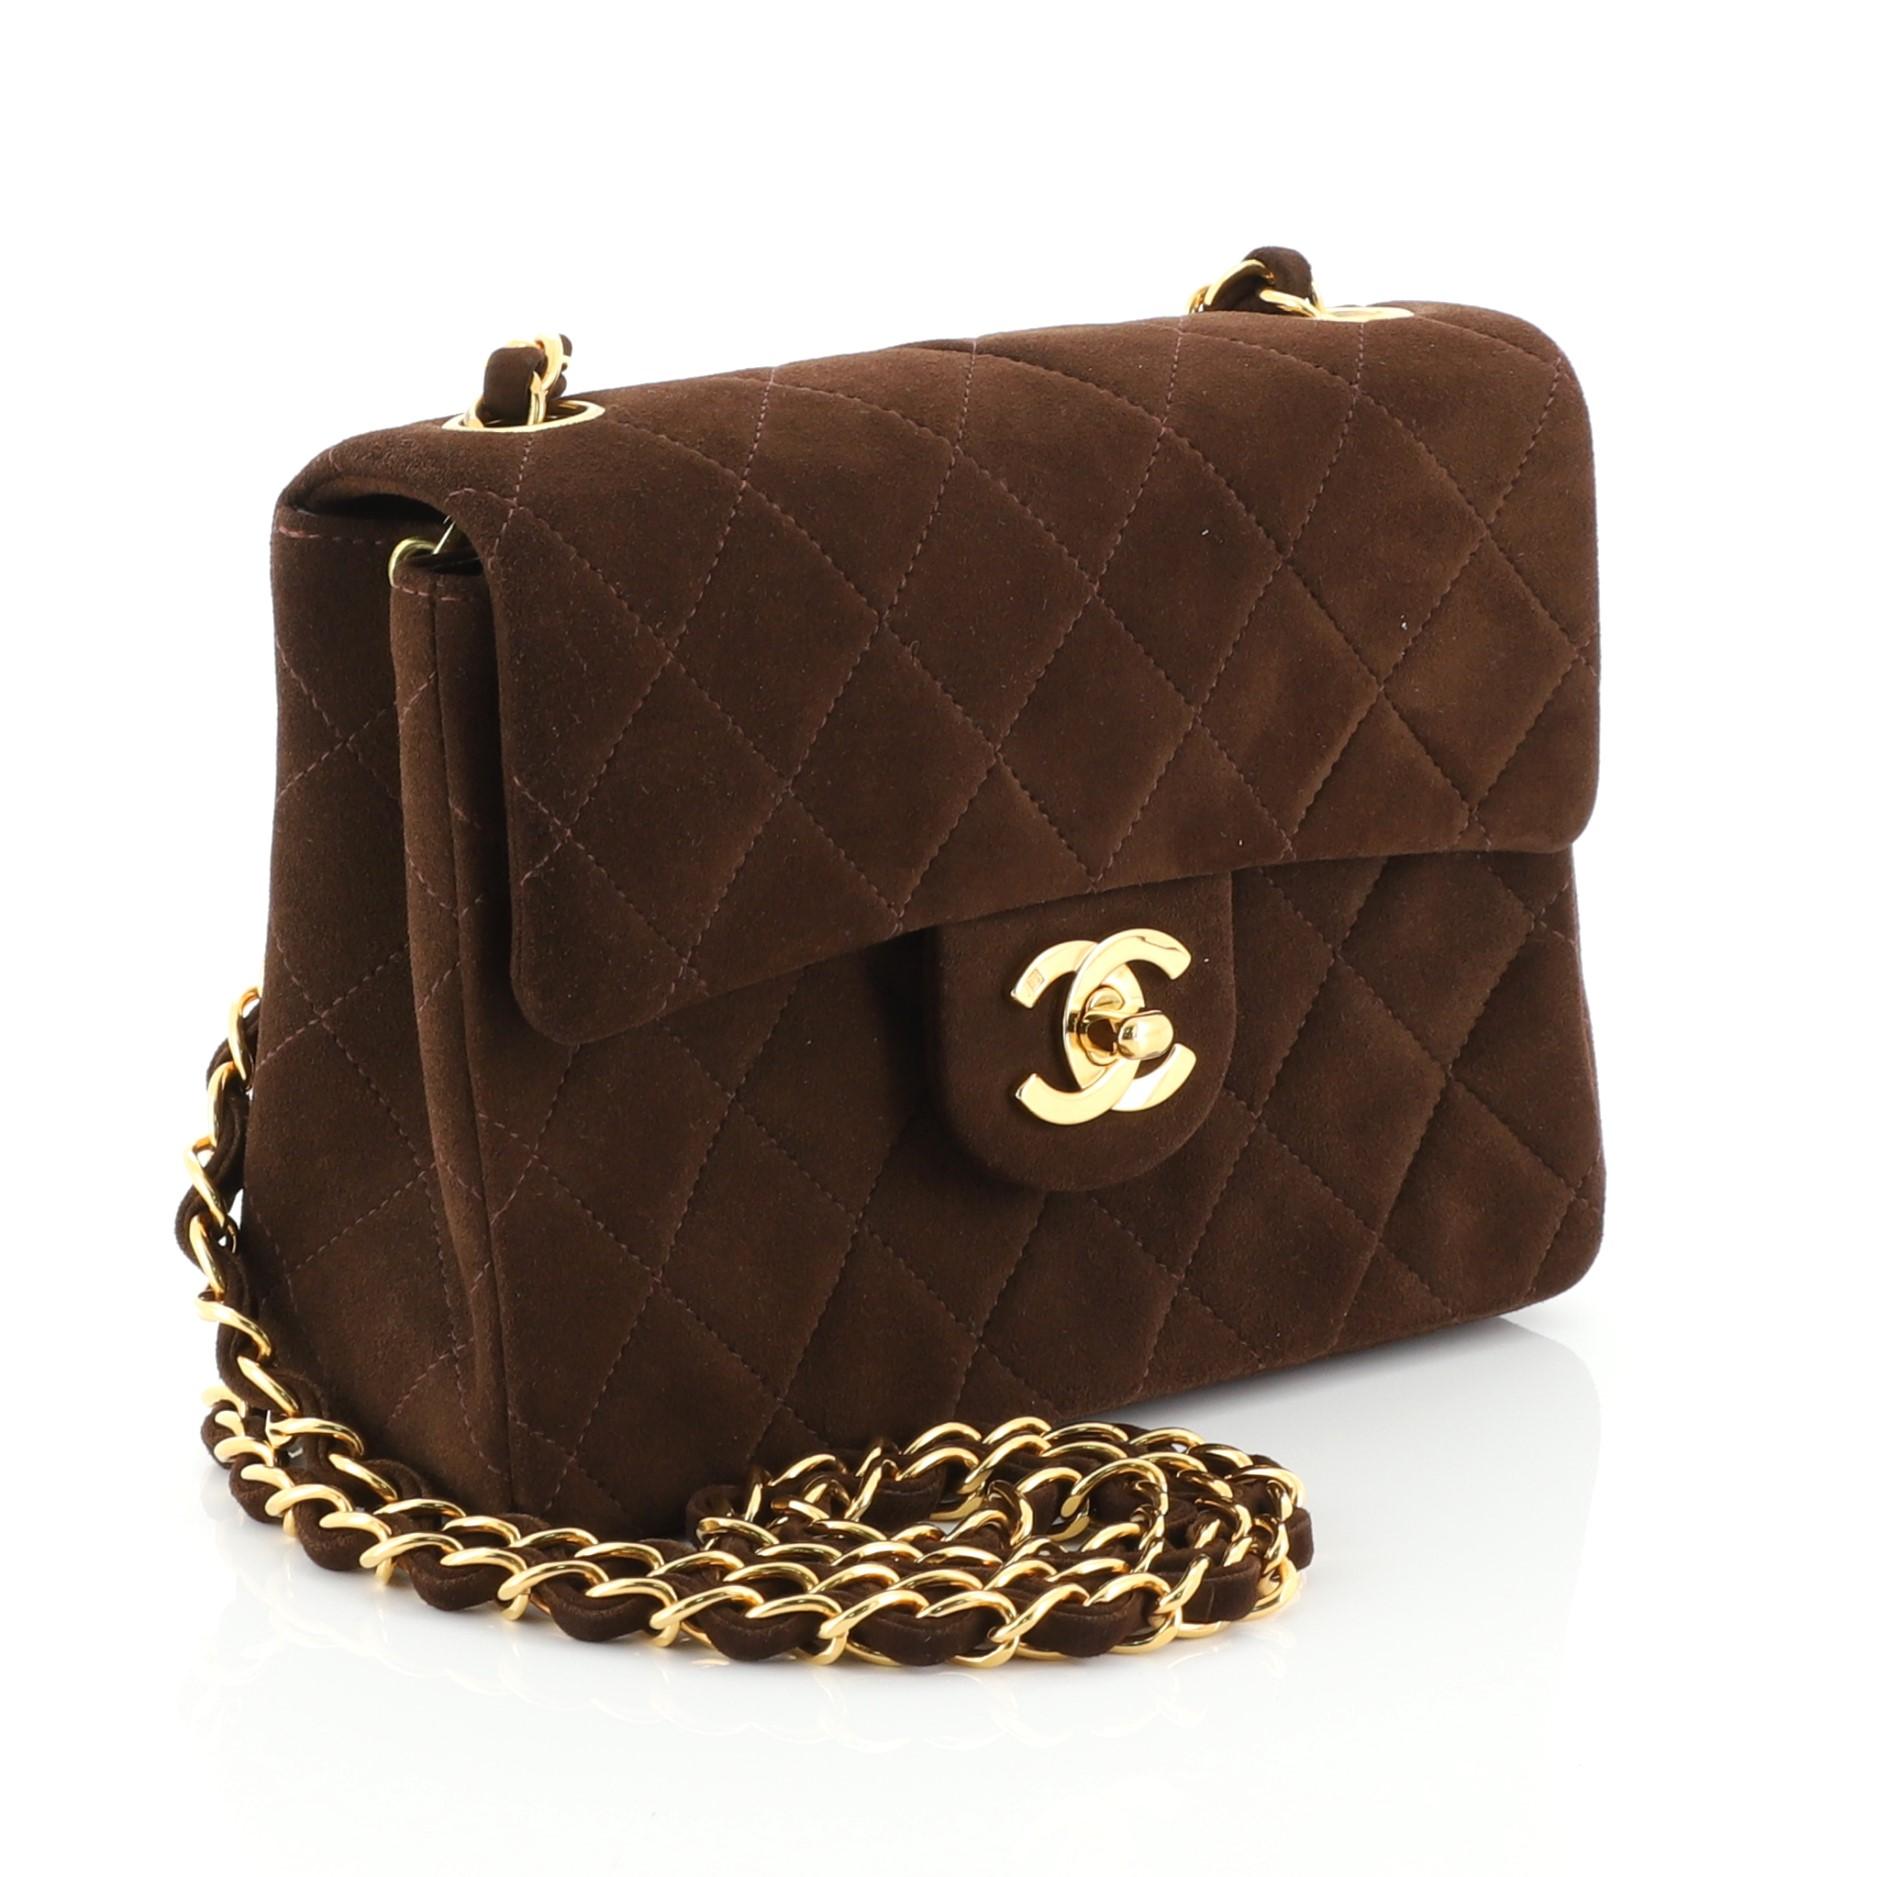 This Chanel Vintage Square Classic Single Flap Bag Quilted Suede Mini, crafted from brown quilted suede, features woven-in chain link straps, a structured silhouette, and gold-tone hardware. Its CC turn-lock closure opens to a brown leather interior